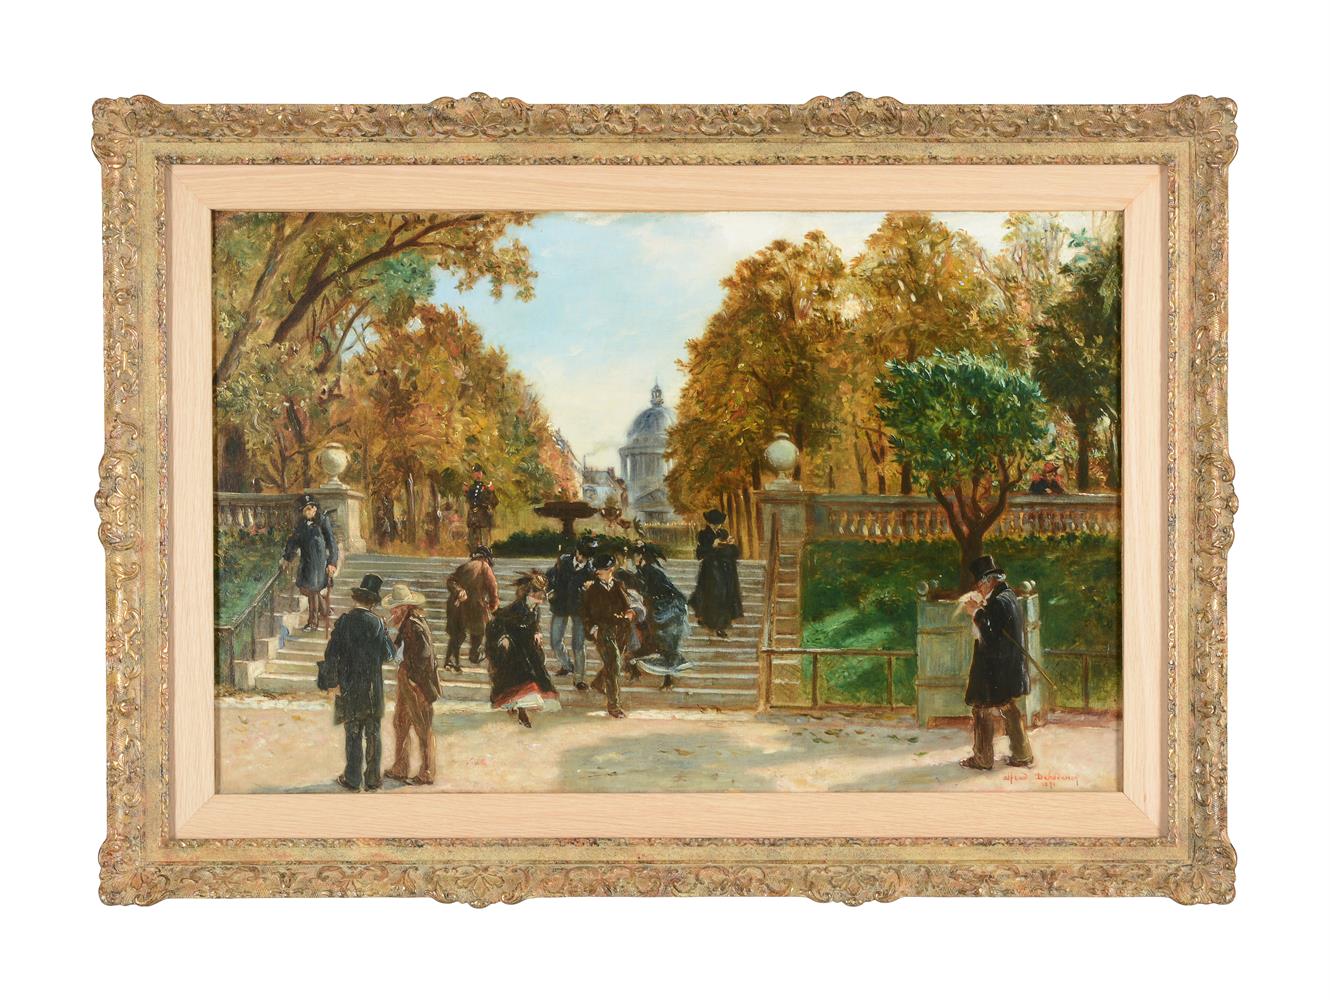 ALFRED DEHODENCQ (FRENCH 1822-1882), FIGURES IN THE JARDIN DU LUXEMBOURG, PARIS - Image 2 of 4